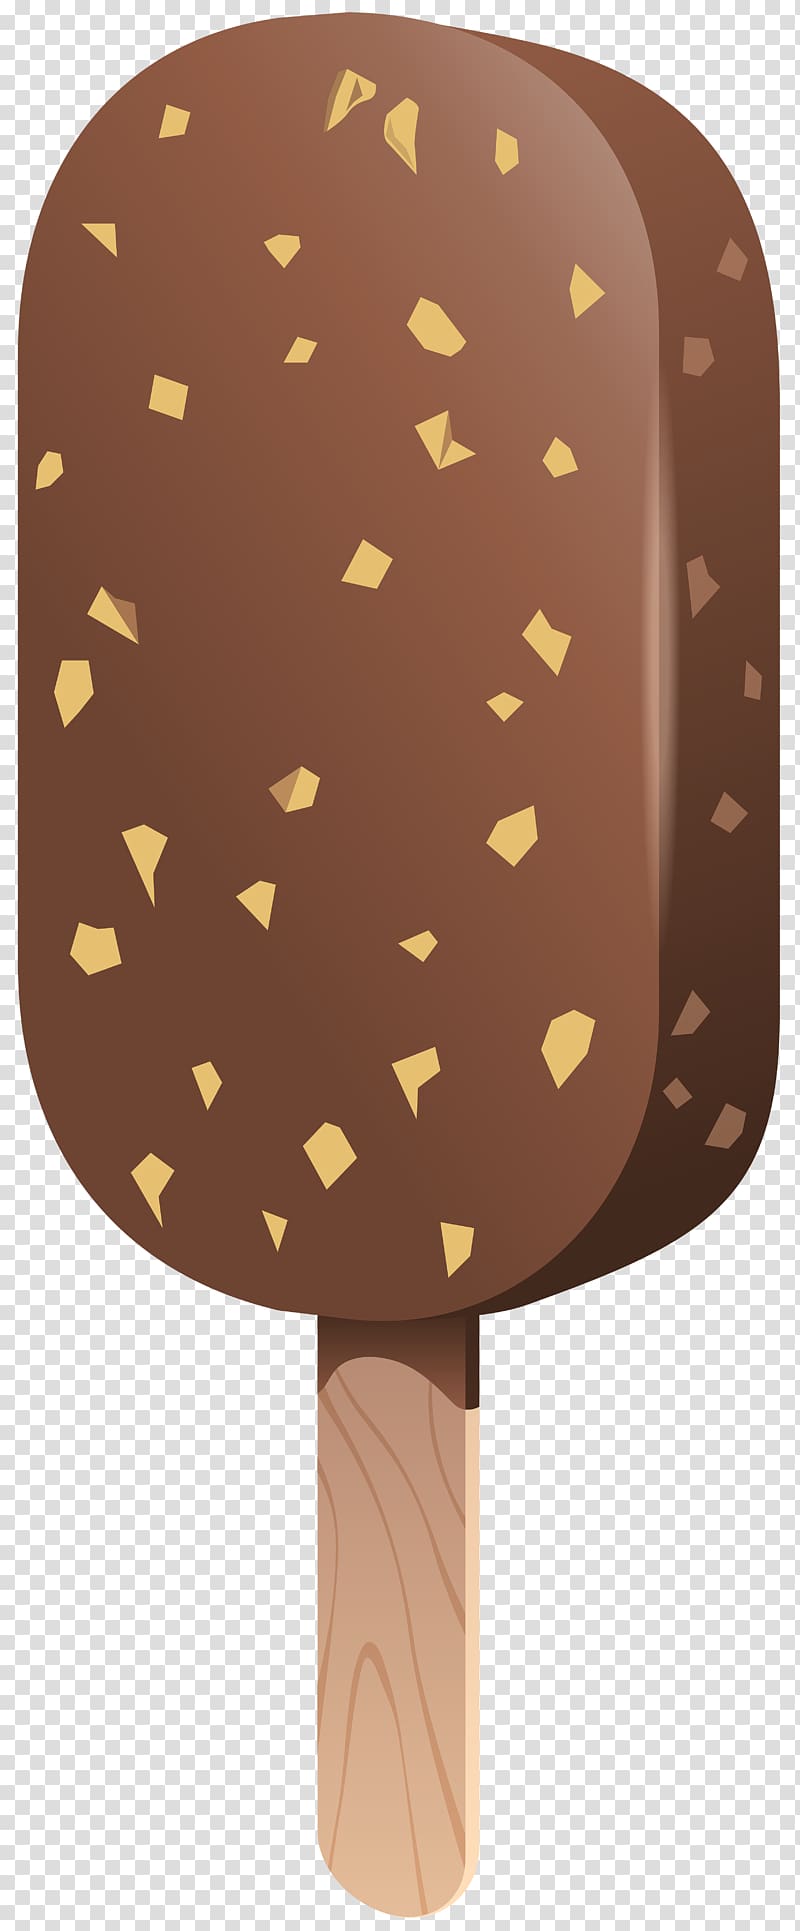 chocolate ice cream on Popsicle stick illustration, Ice cream cone Ice pop , Ice Cream Stick transparent background PNG clipart